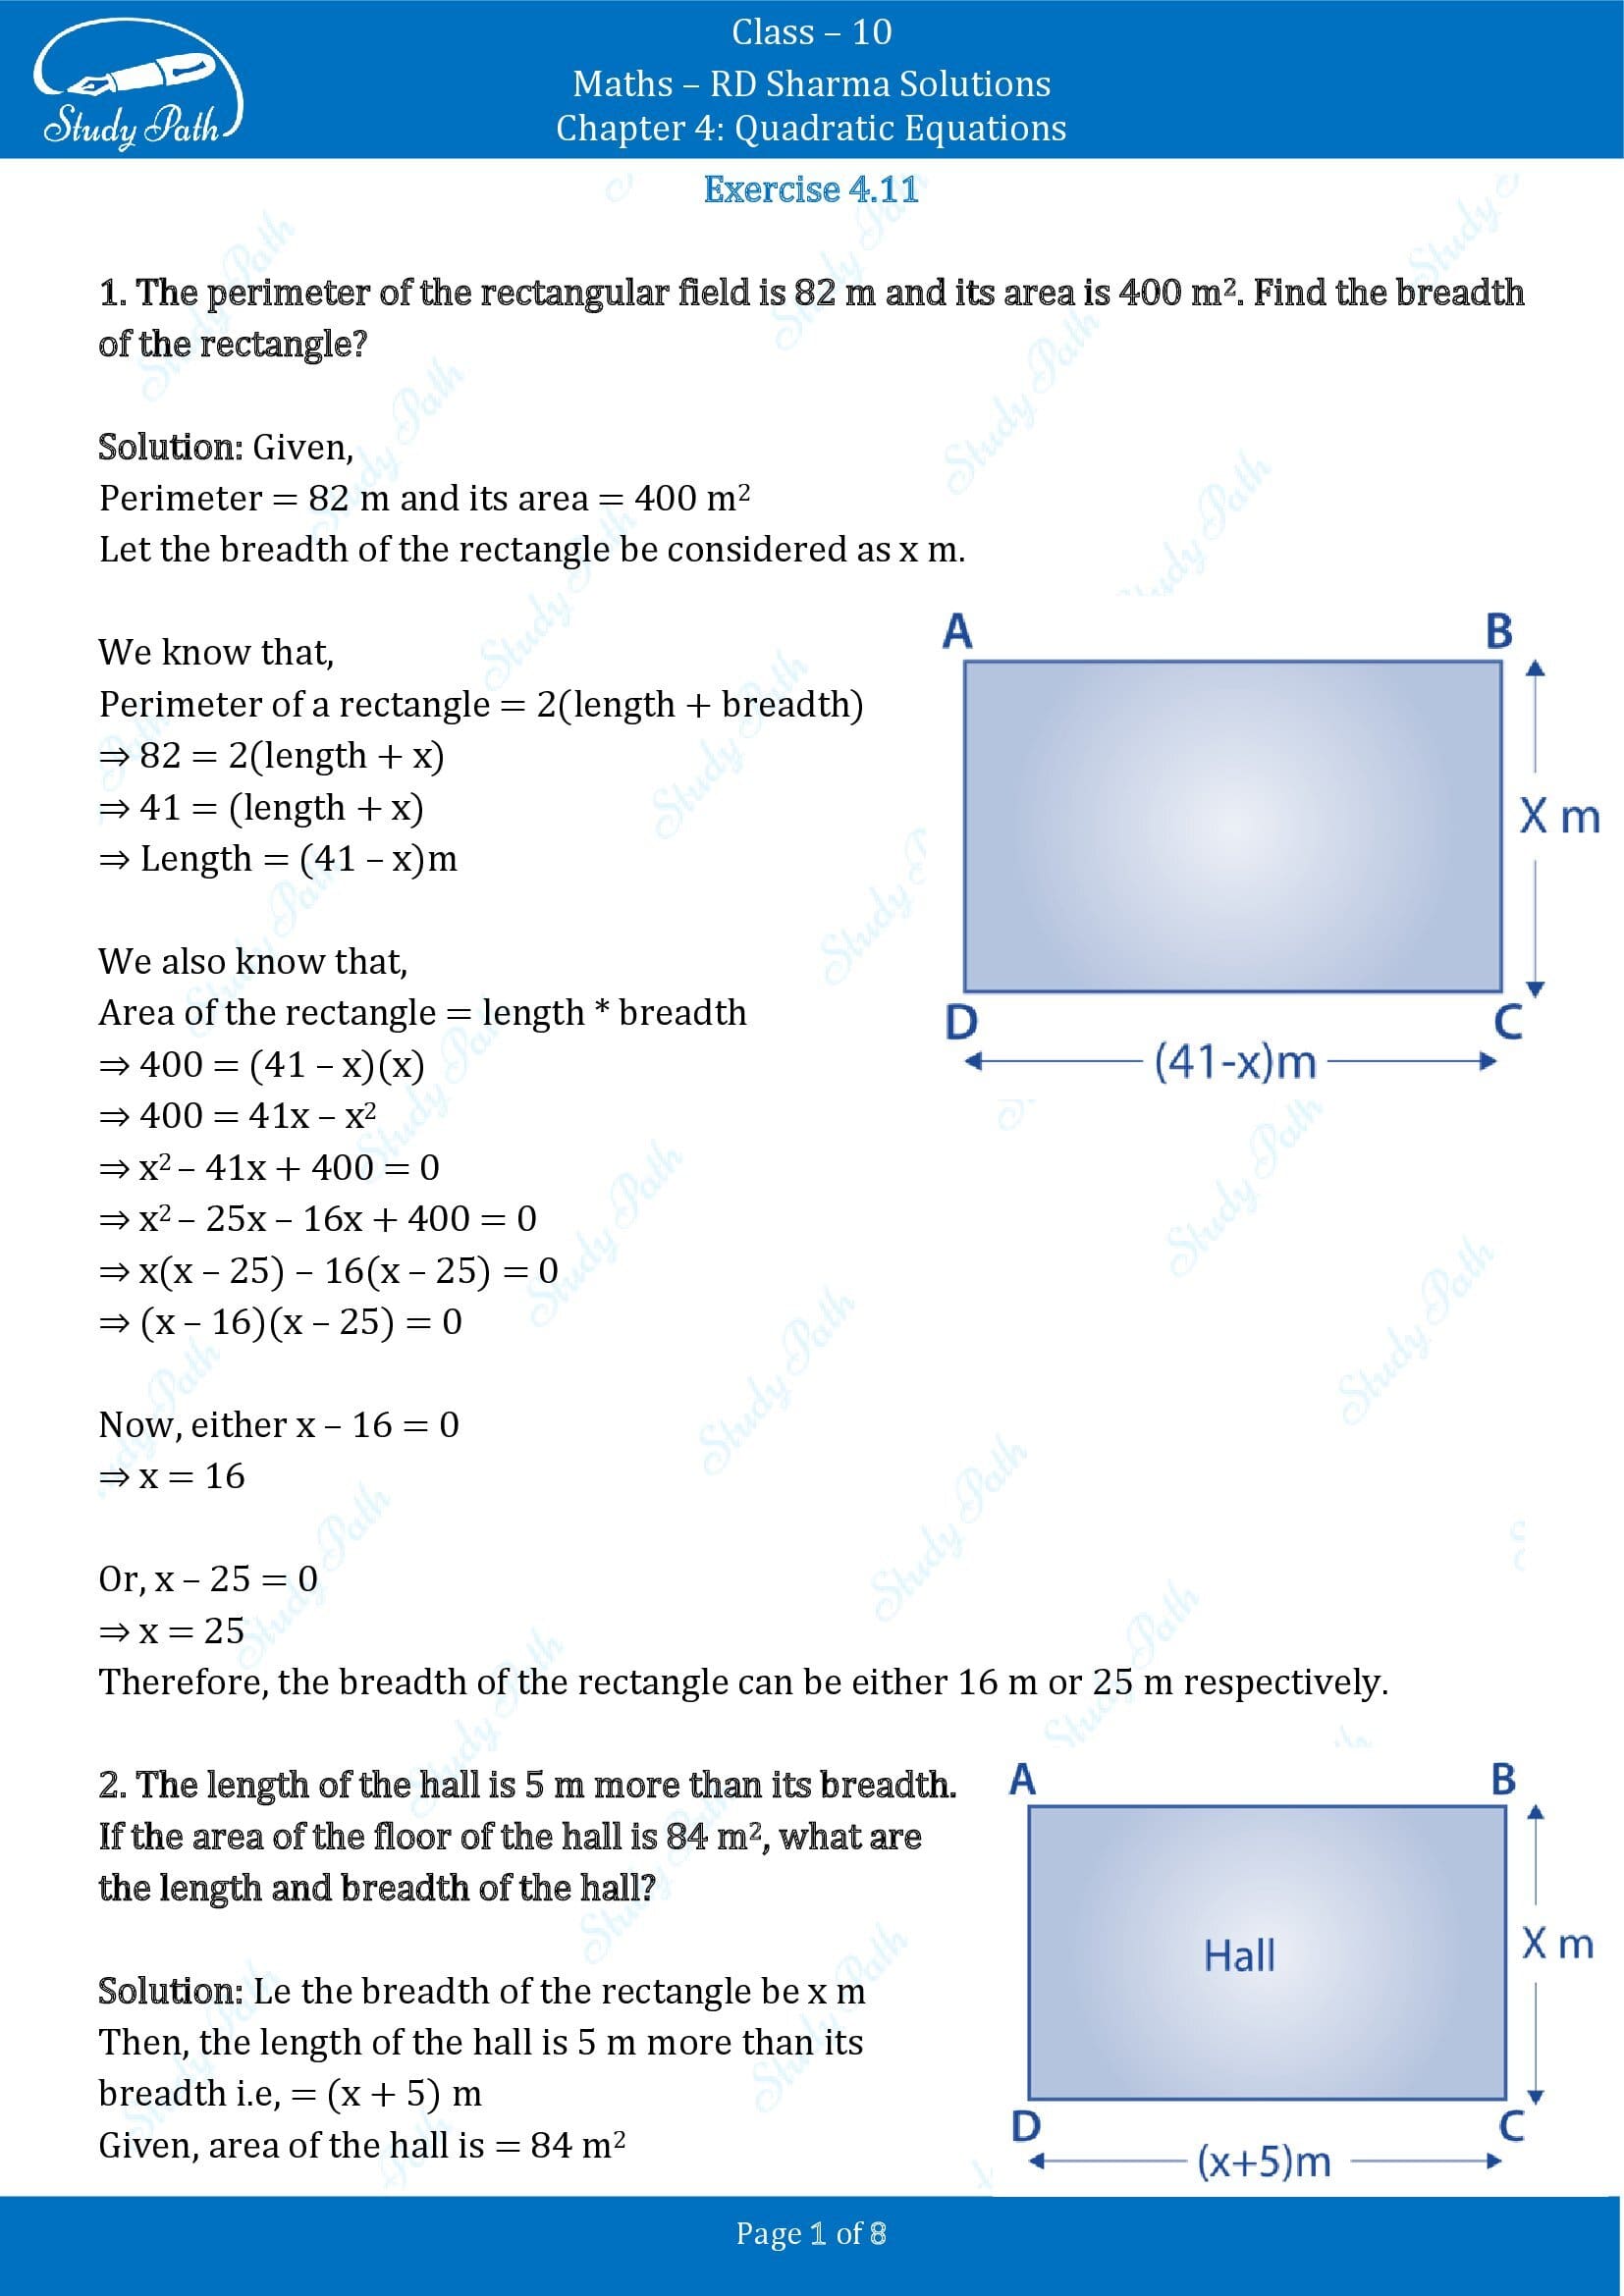 RD Sharma Solutions Class 10 Chapter 4 Quadratic Equations Exercise 4.11 00001